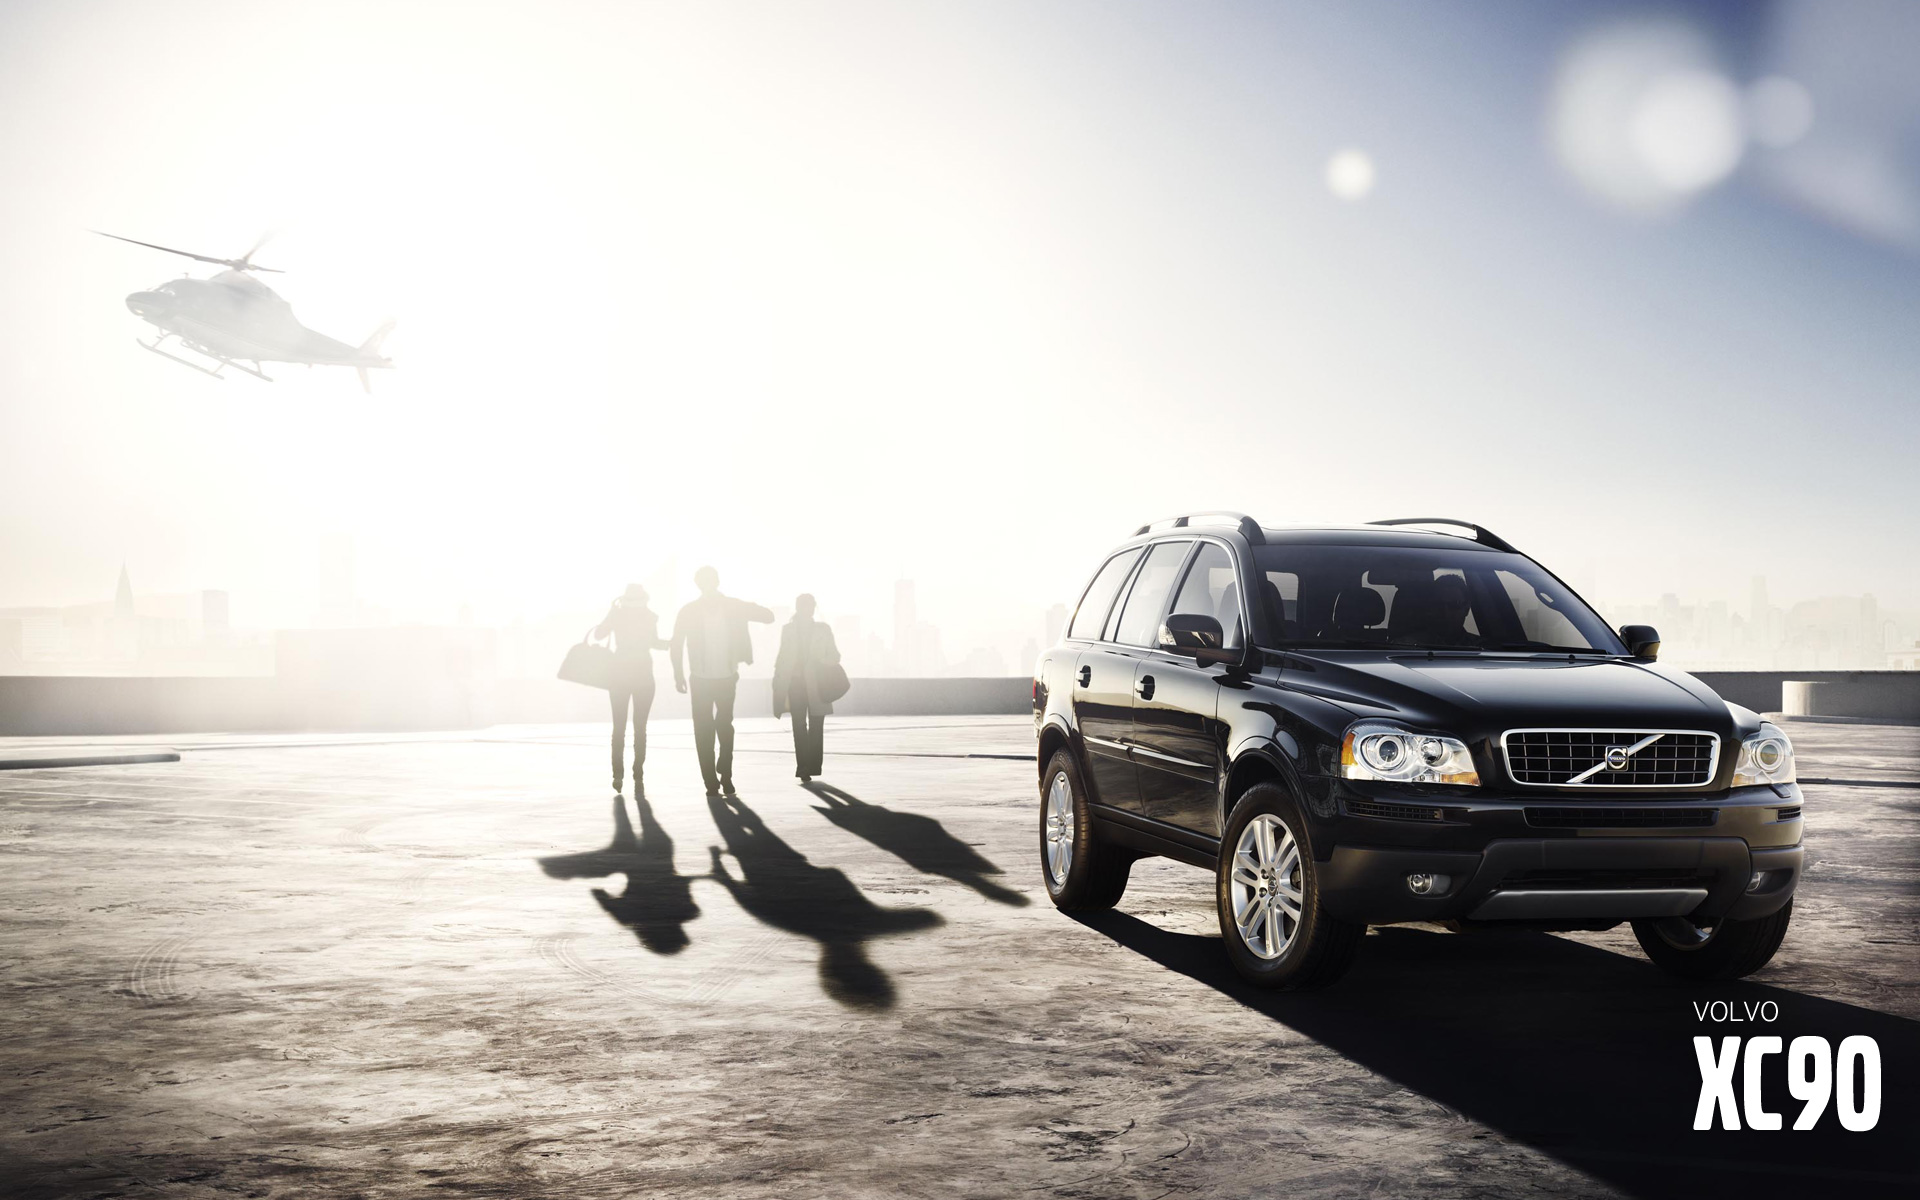 Image For Volvo Xc90 HD Wallpaper